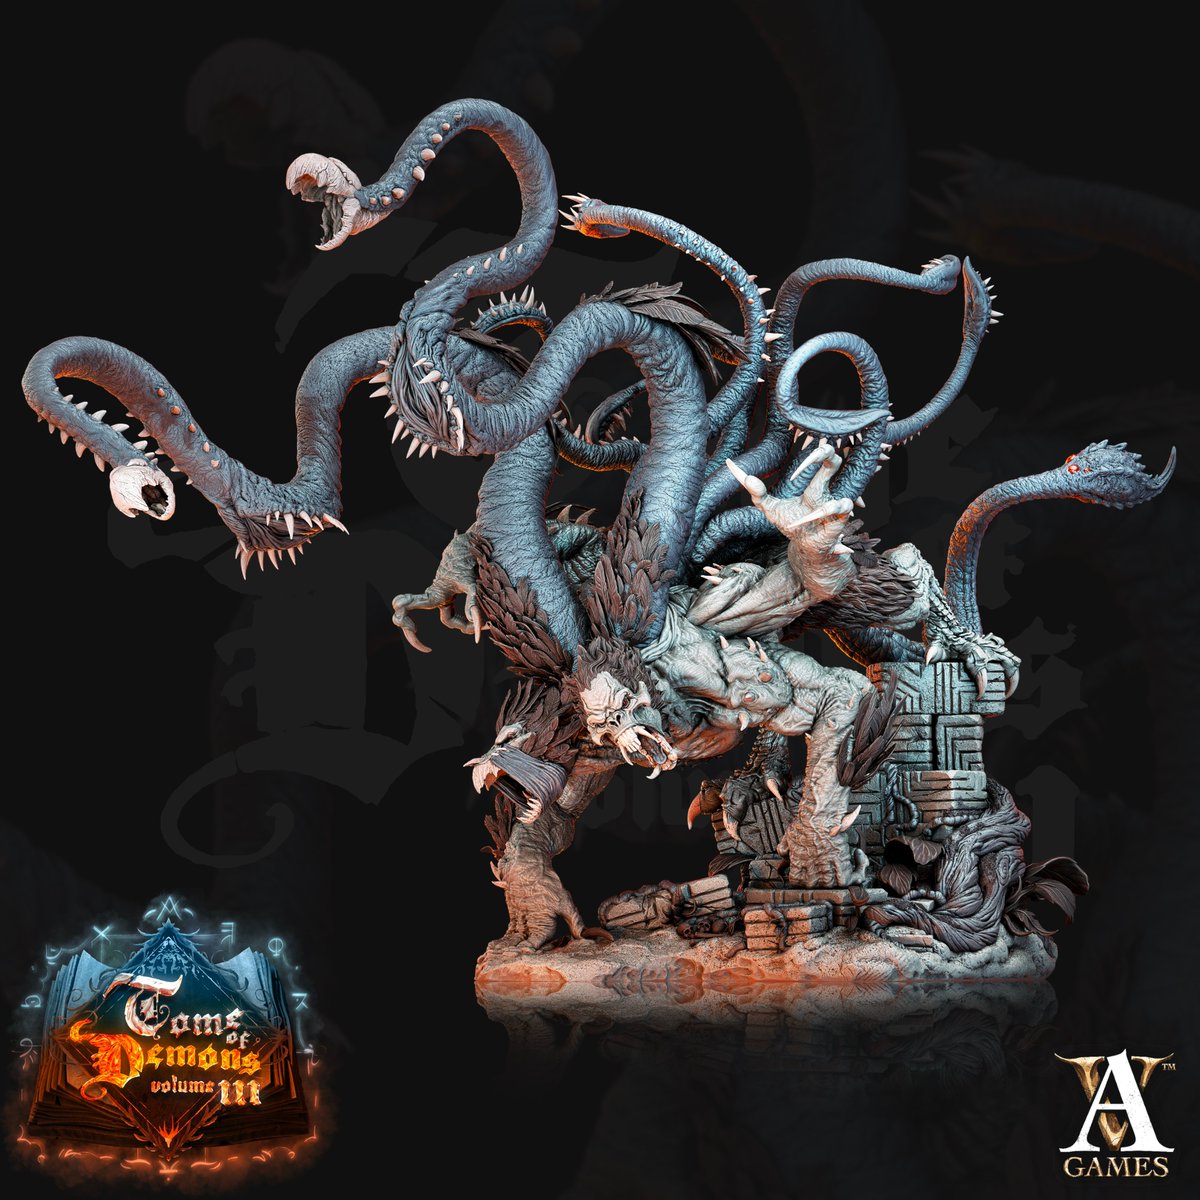 We are super stoked to announce that we have added Arch Villian miniatures to our shop!
plagueminiatures.etsy.com 

#dnd #dndminiatures #miniaturepainting #paintingminiatures #plagueminiatures #dungeonsanddragons #demonminiatures #dndminis #dndmonsters #tabletopgaming #tabletoprpgs